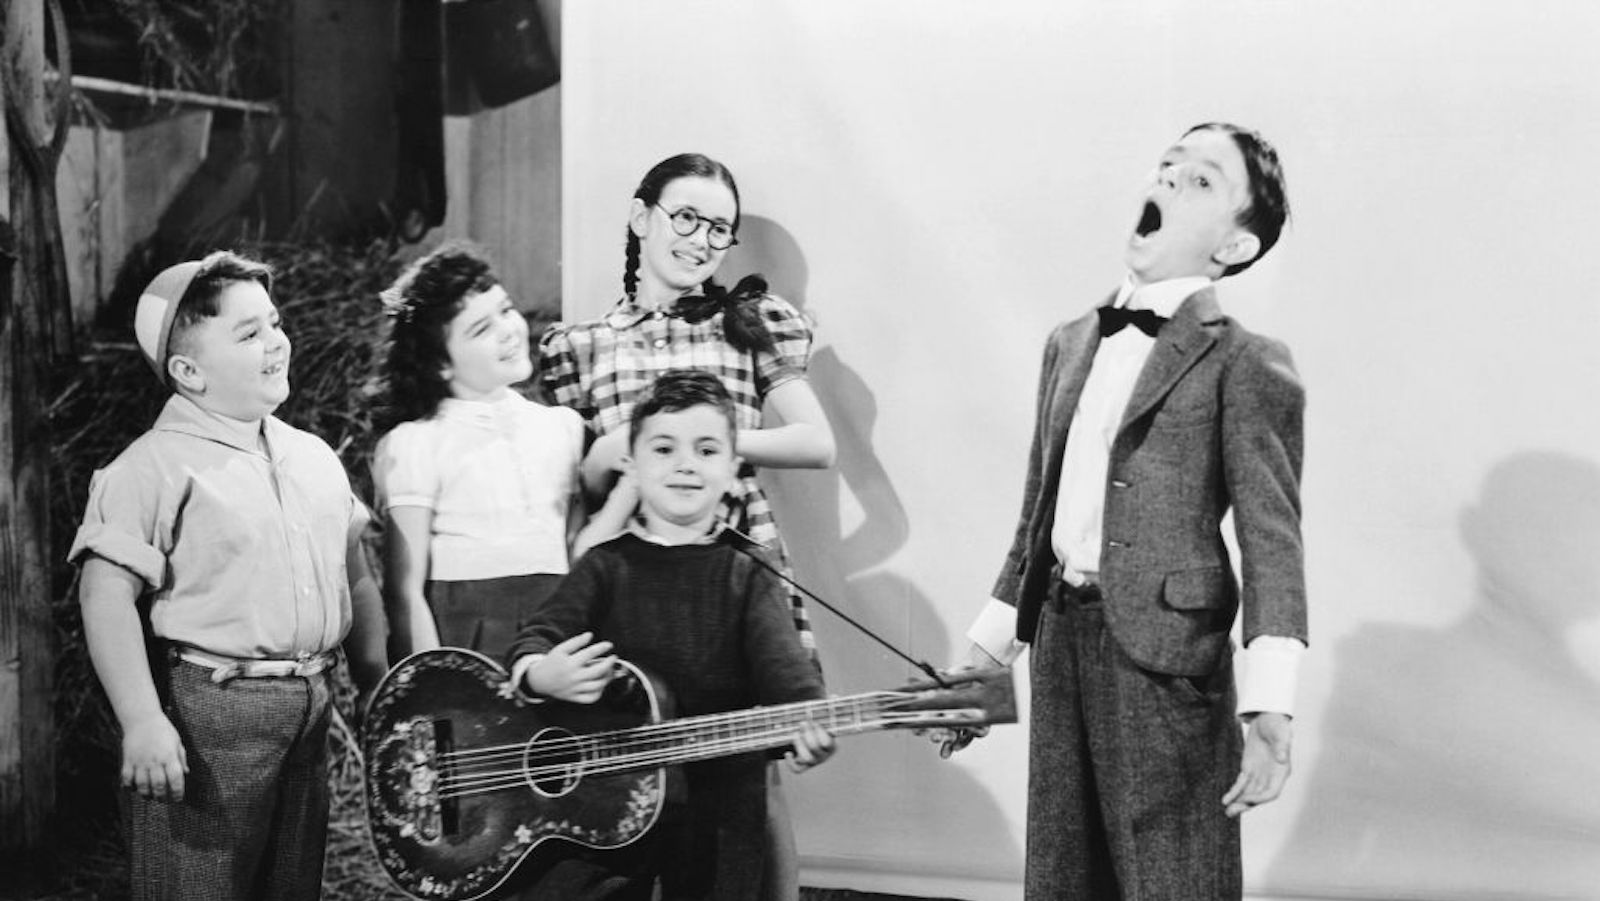 The cast of Our Gang/The Little Rascals singing, circa 1930.